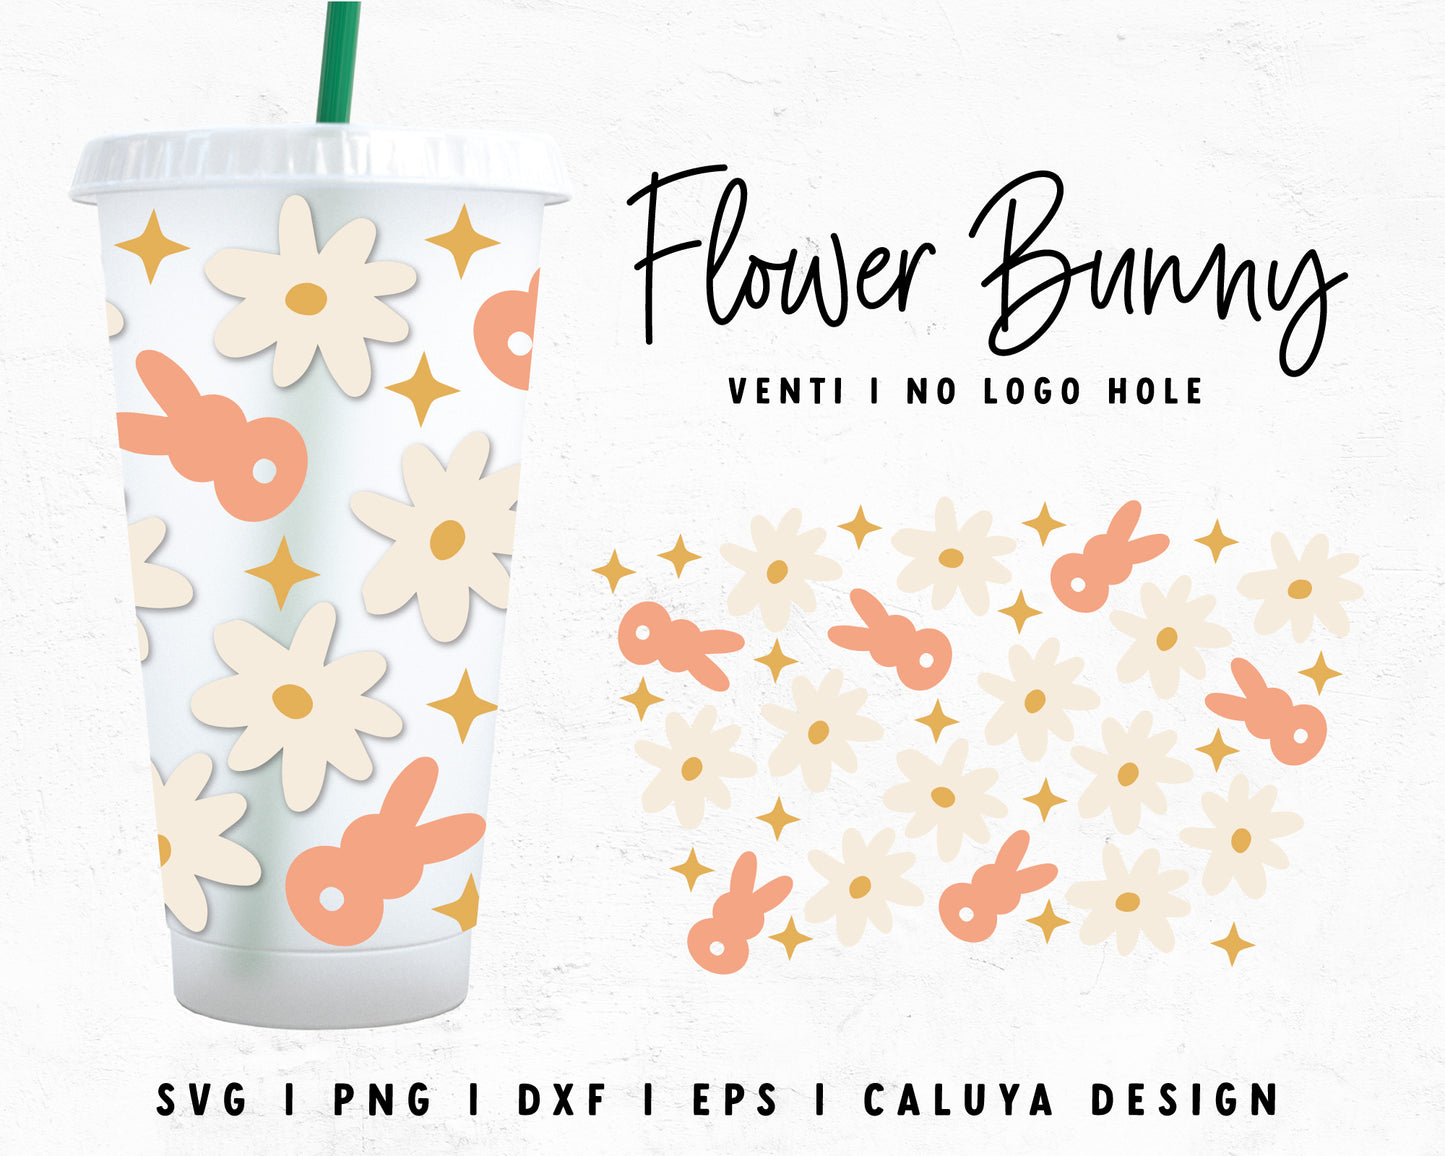 Venti Cup No Hole Flower & Easter Bunny Cup Wrap Cut File for Cricut, Cameo Silhouette | Free SVG Cut File